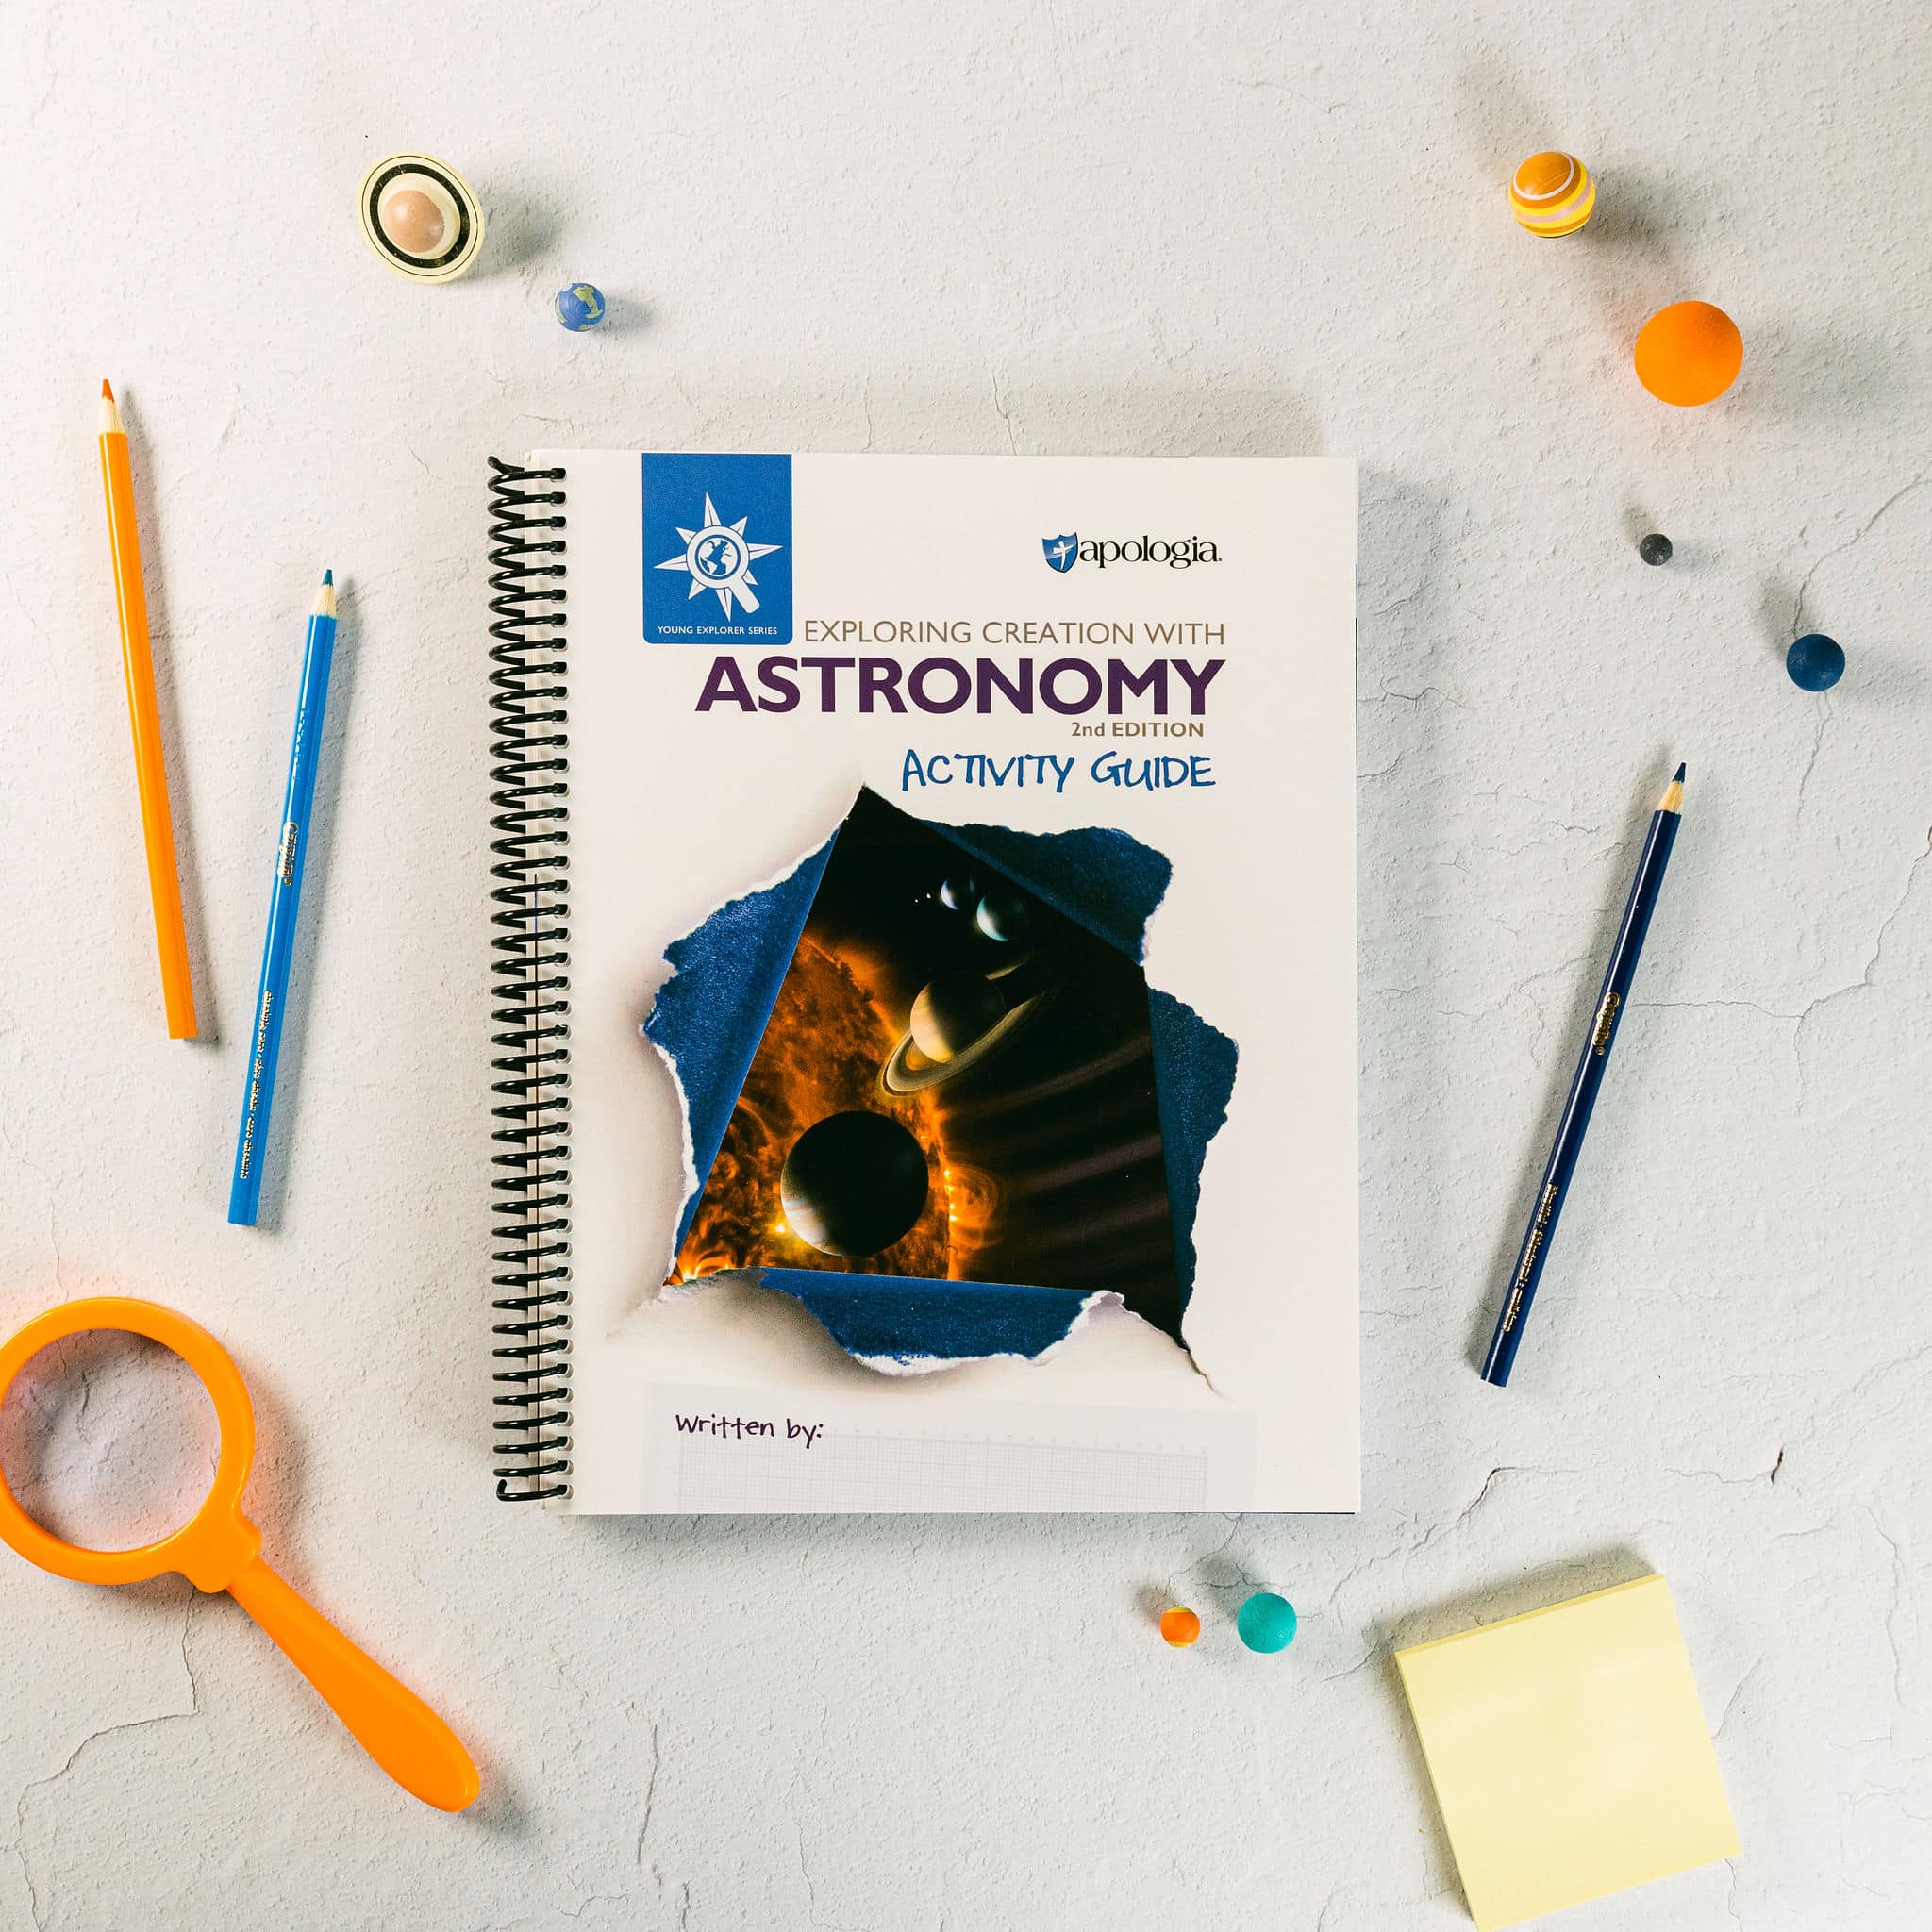 Astronomy Science Kit Activity Guide